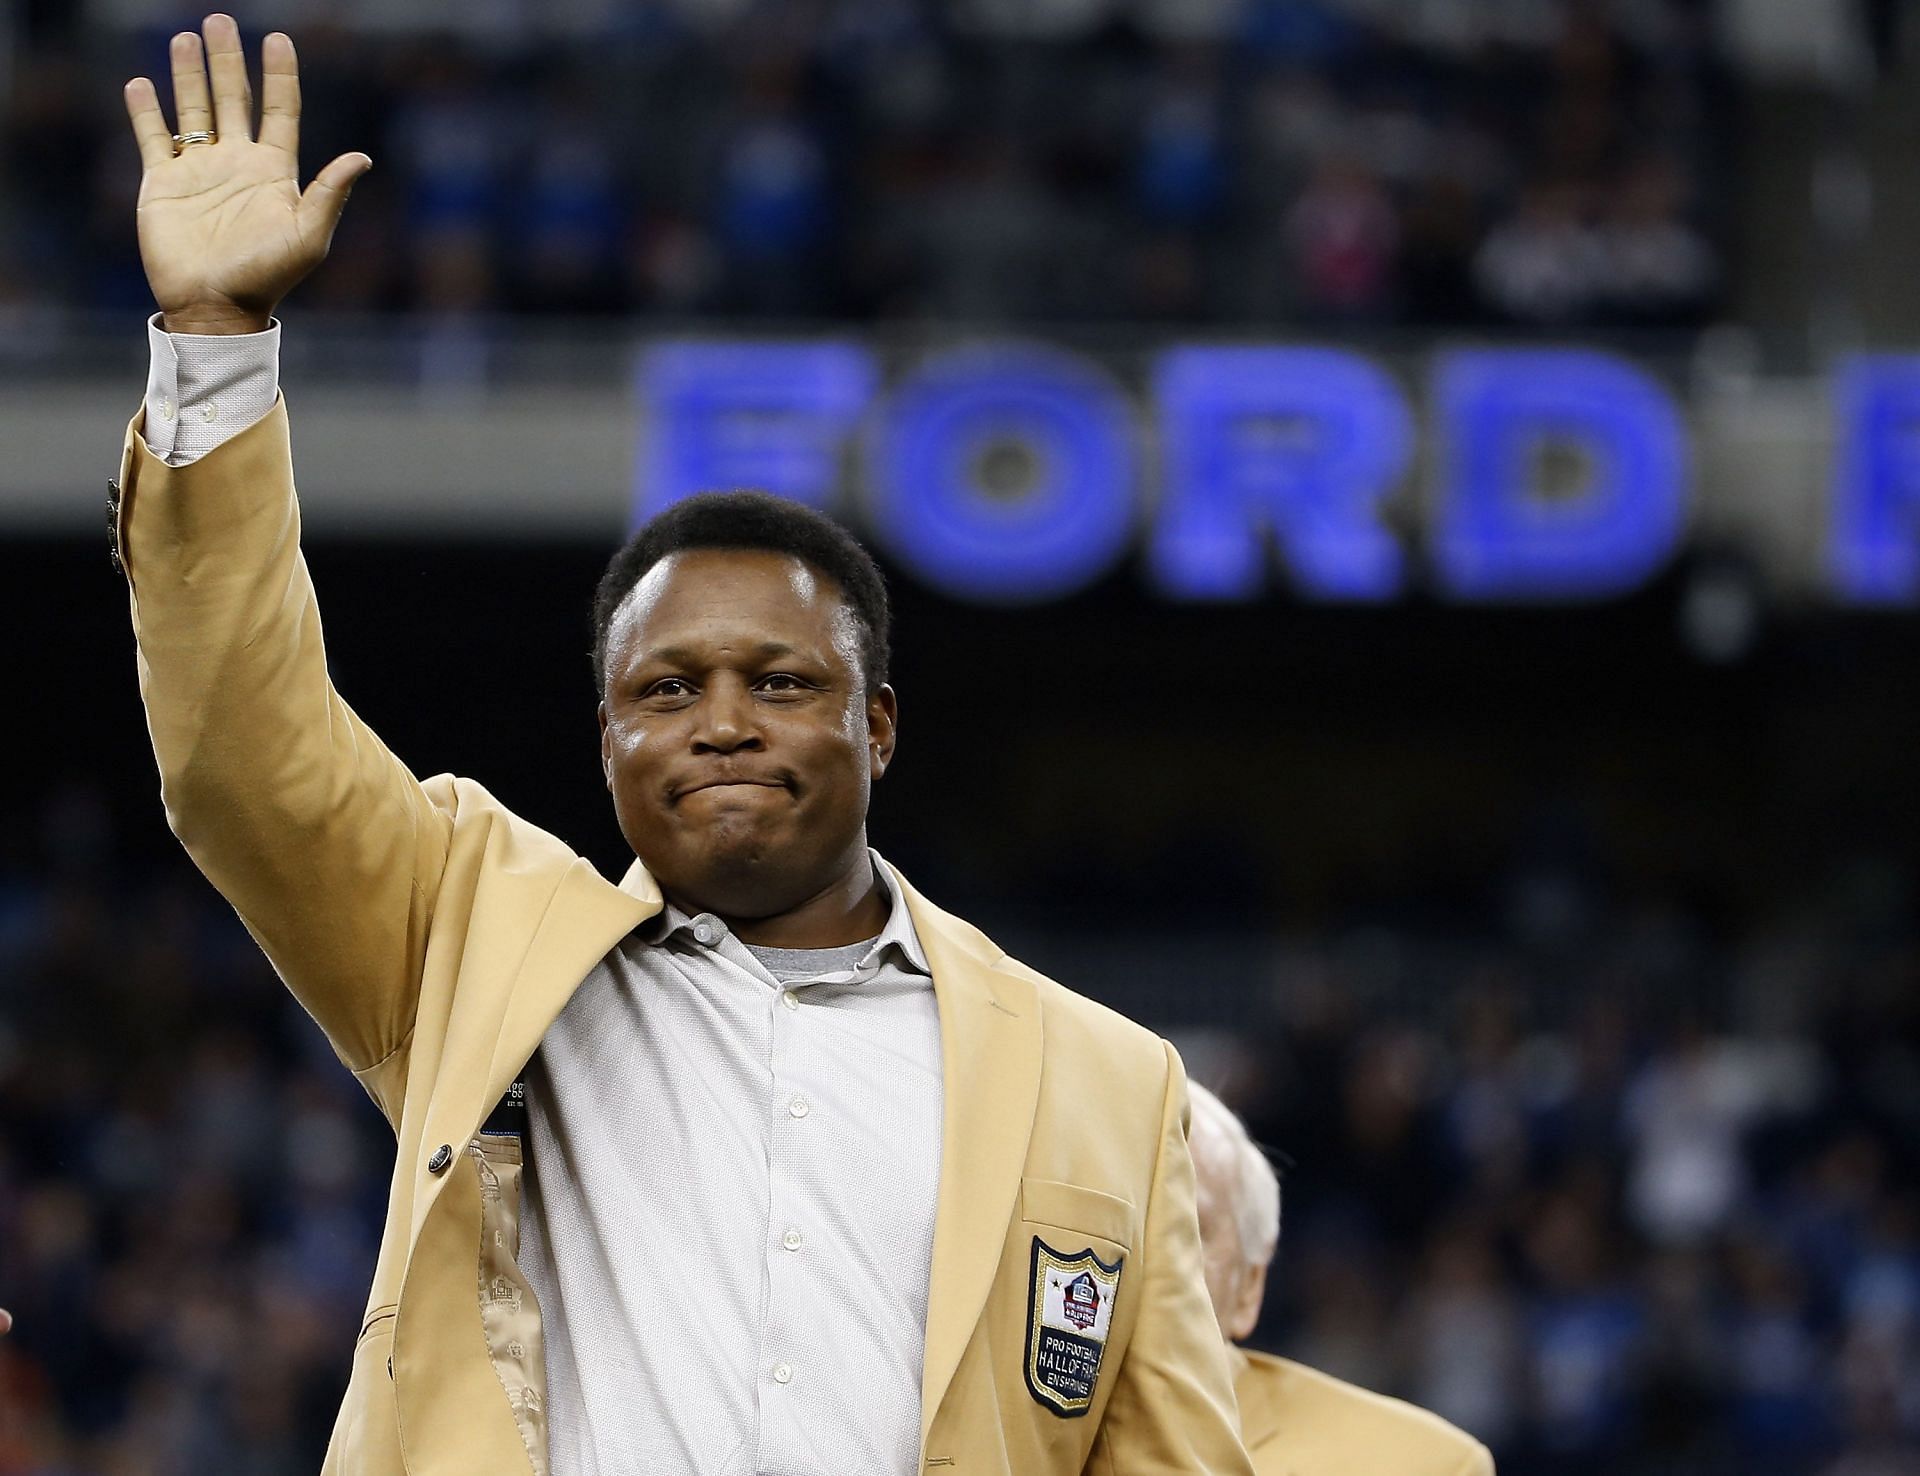 Barry Sanders had a Hall of Fame NFL career after Heisman win